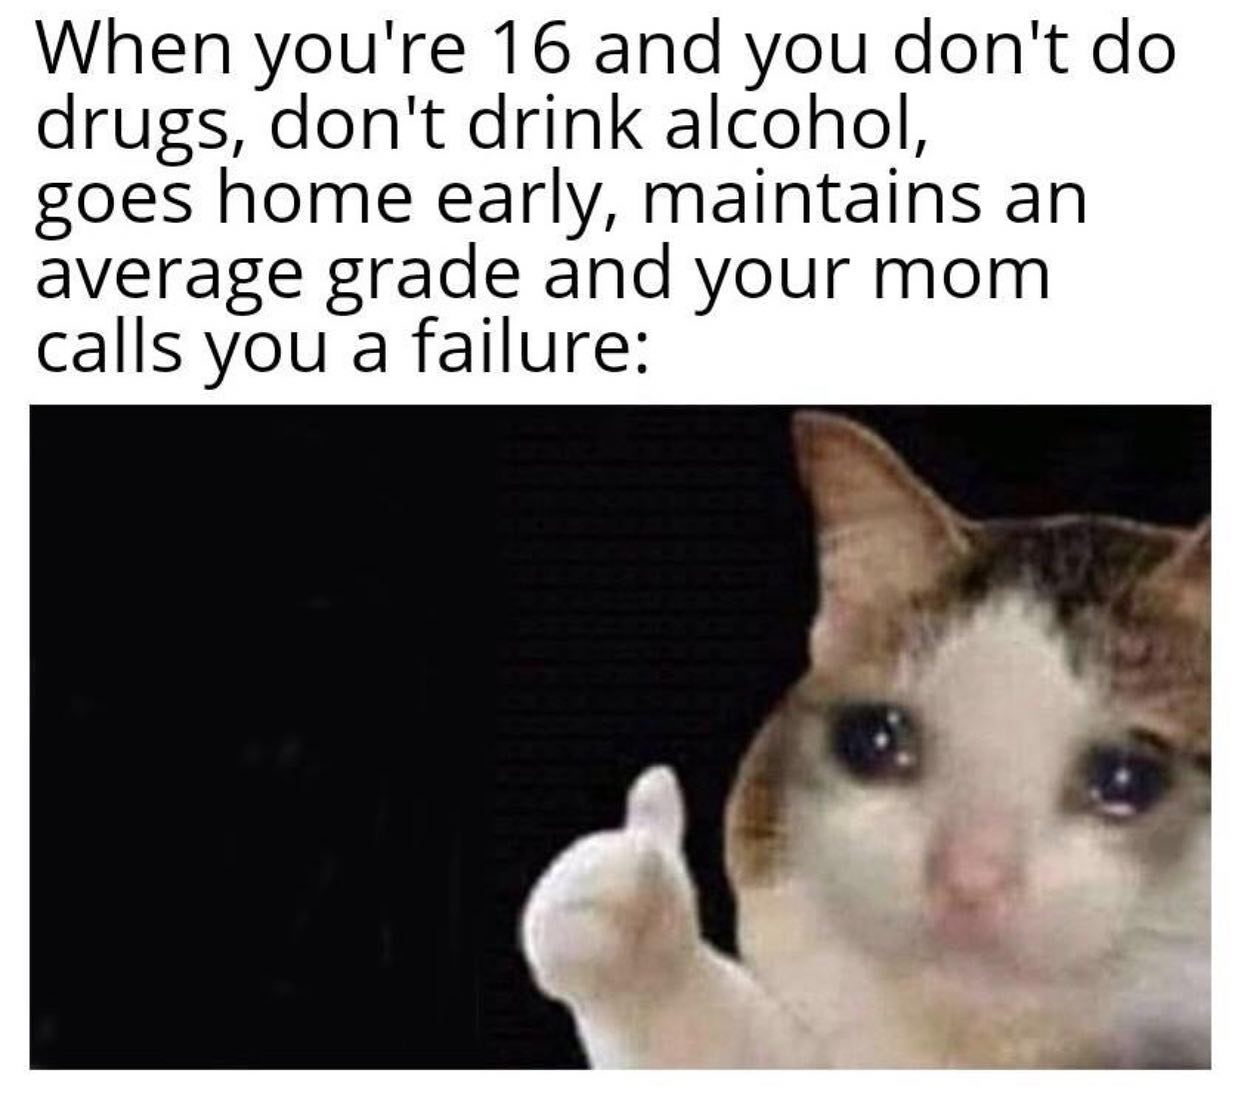 dank memes - gato sticker - When you're 16 and you don't do drugs, don't drink alcohol, goes home early, maintains an average grade and your mom calls you a failure